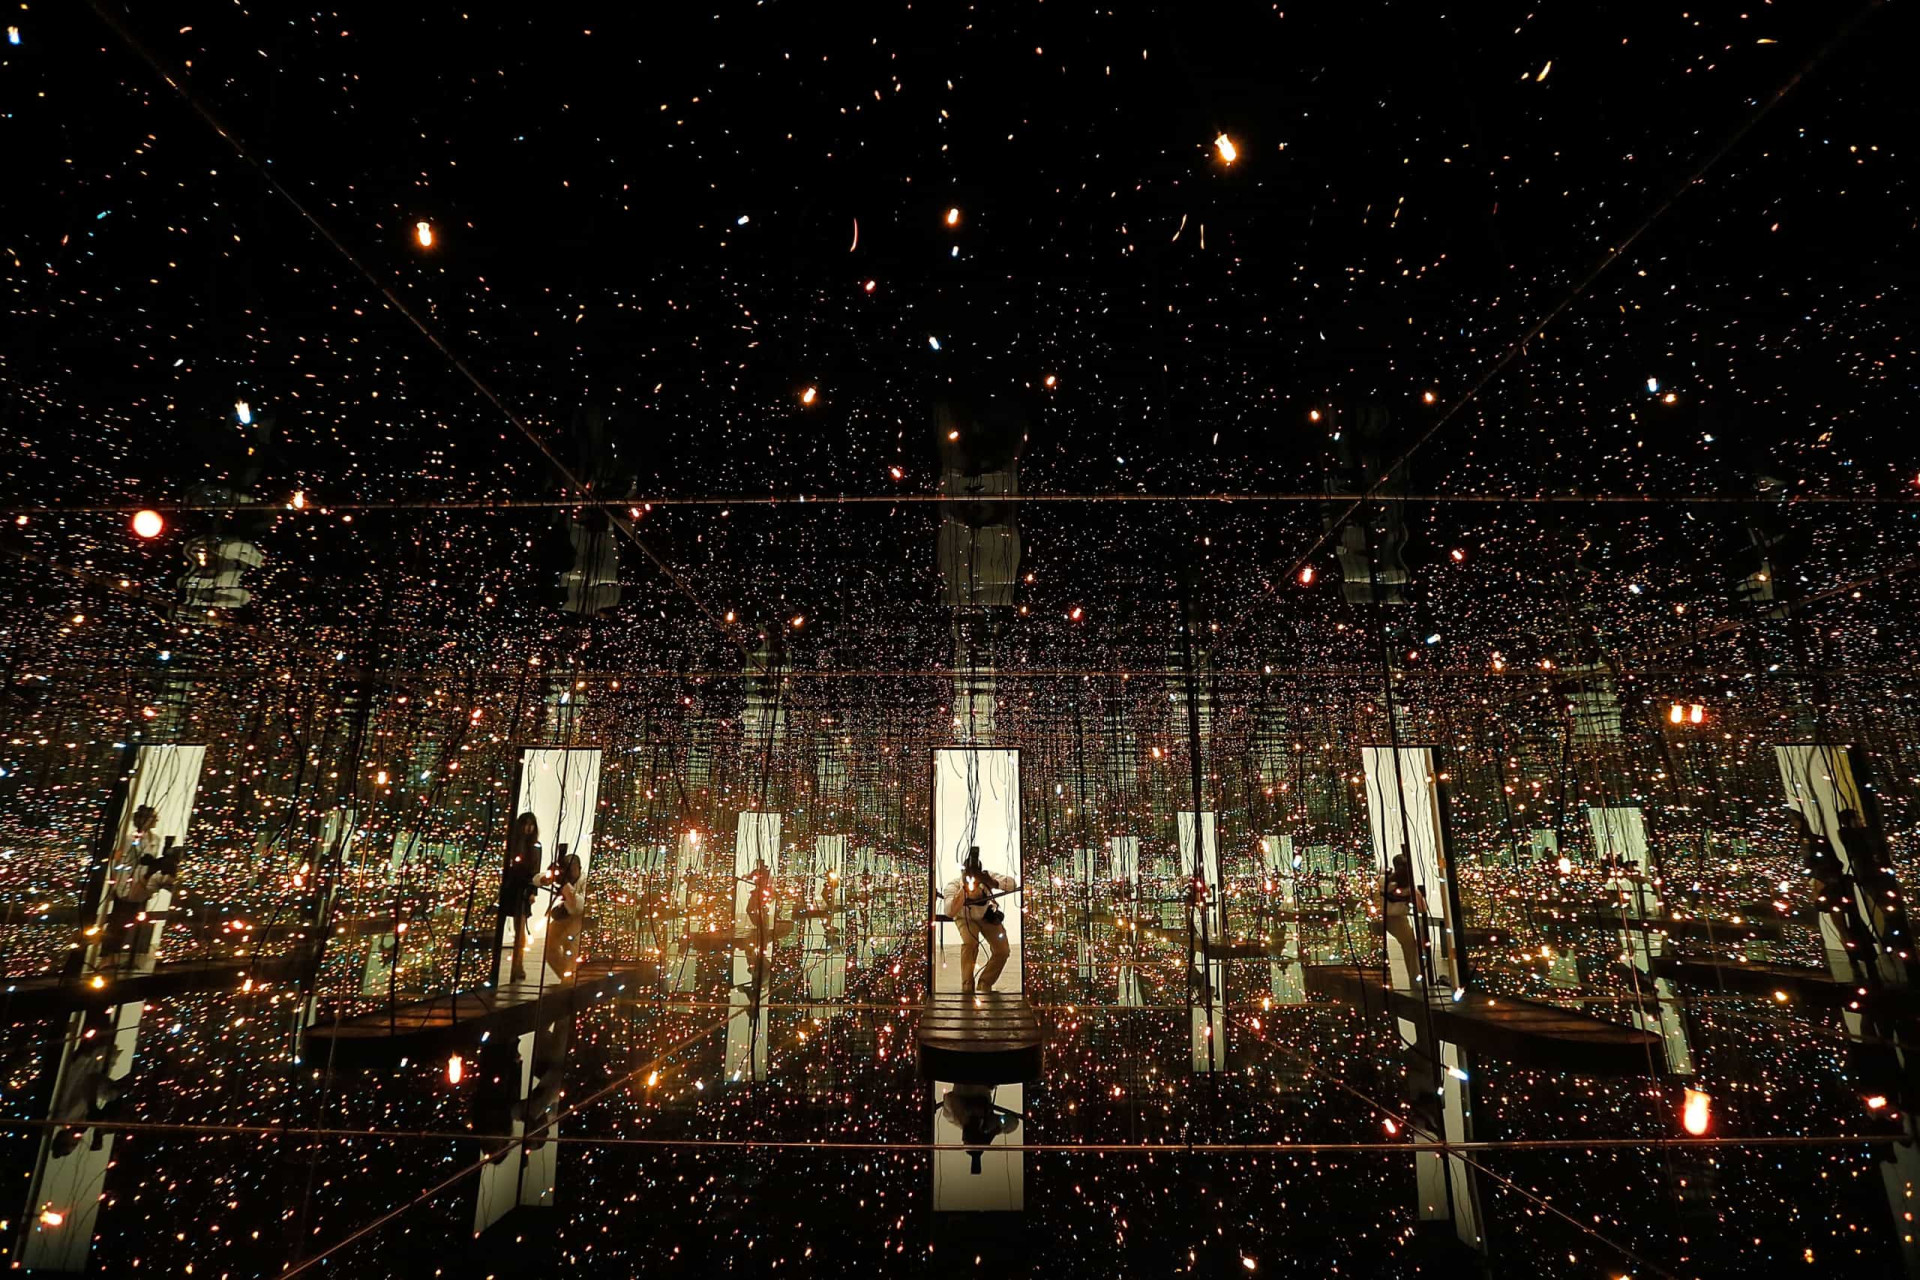 <p>Located in the Contemporary Art Wing of the Phoenix Art Museum, "Fireflies," Japanese artist Yayoi Kusama's mesmerizing installation, is a permanent wonder in the aptly-named The Yayoi Kusama Infinity Room.</p><p>You may also like:<a href="https://www.starsinsider.com/n/249074?utm_source=msn.com&utm_medium=display&utm_campaign=referral_description&utm_content=198095v22en-en"> The most-asked "why" questions on Google</a></p>